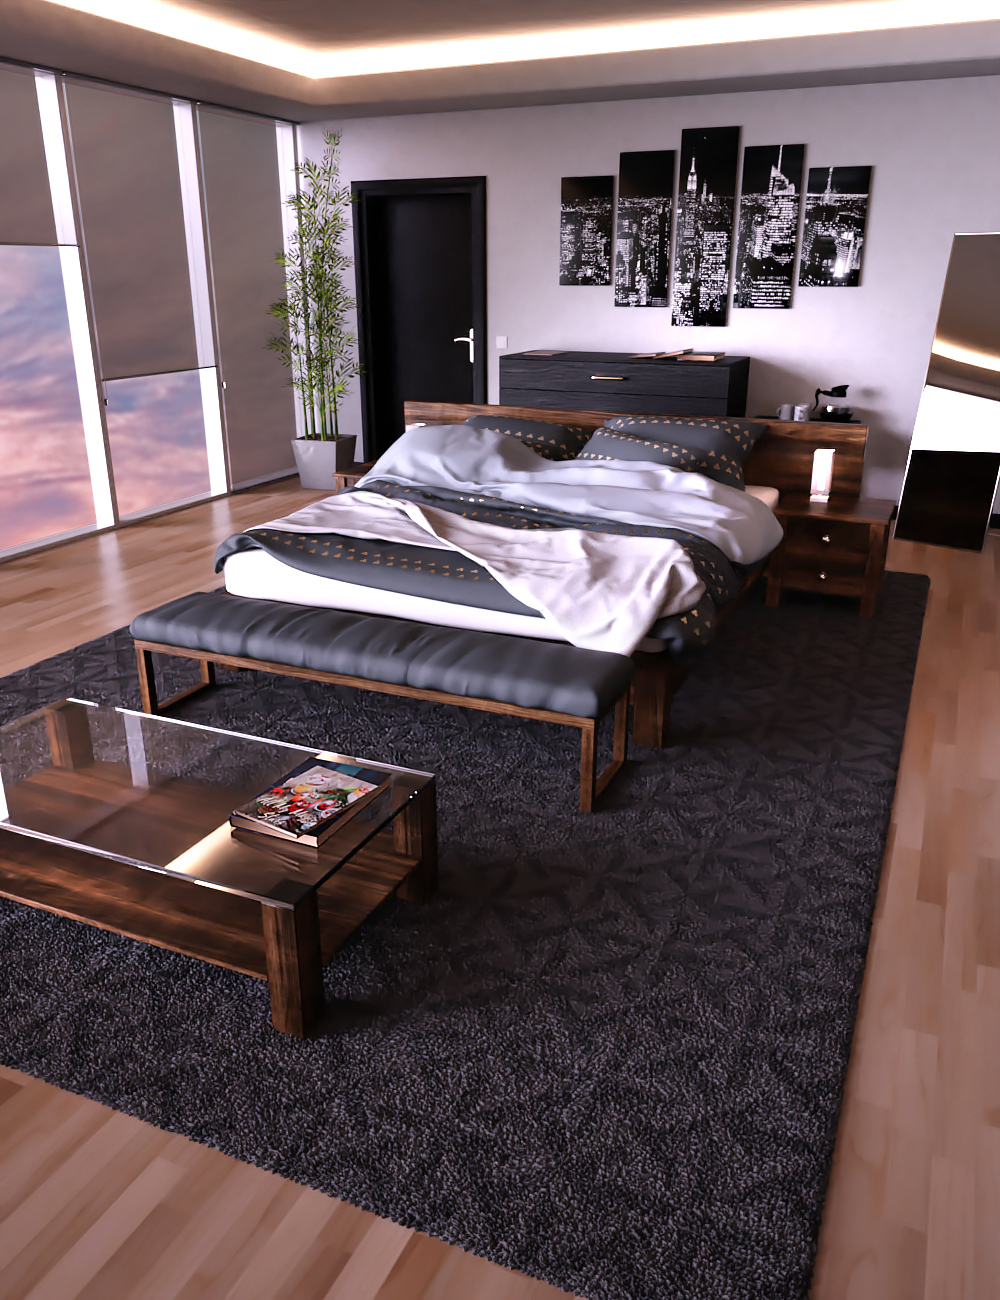 X3D High-Rise Bedroom by: Xile3D, 3D Models by Daz 3D